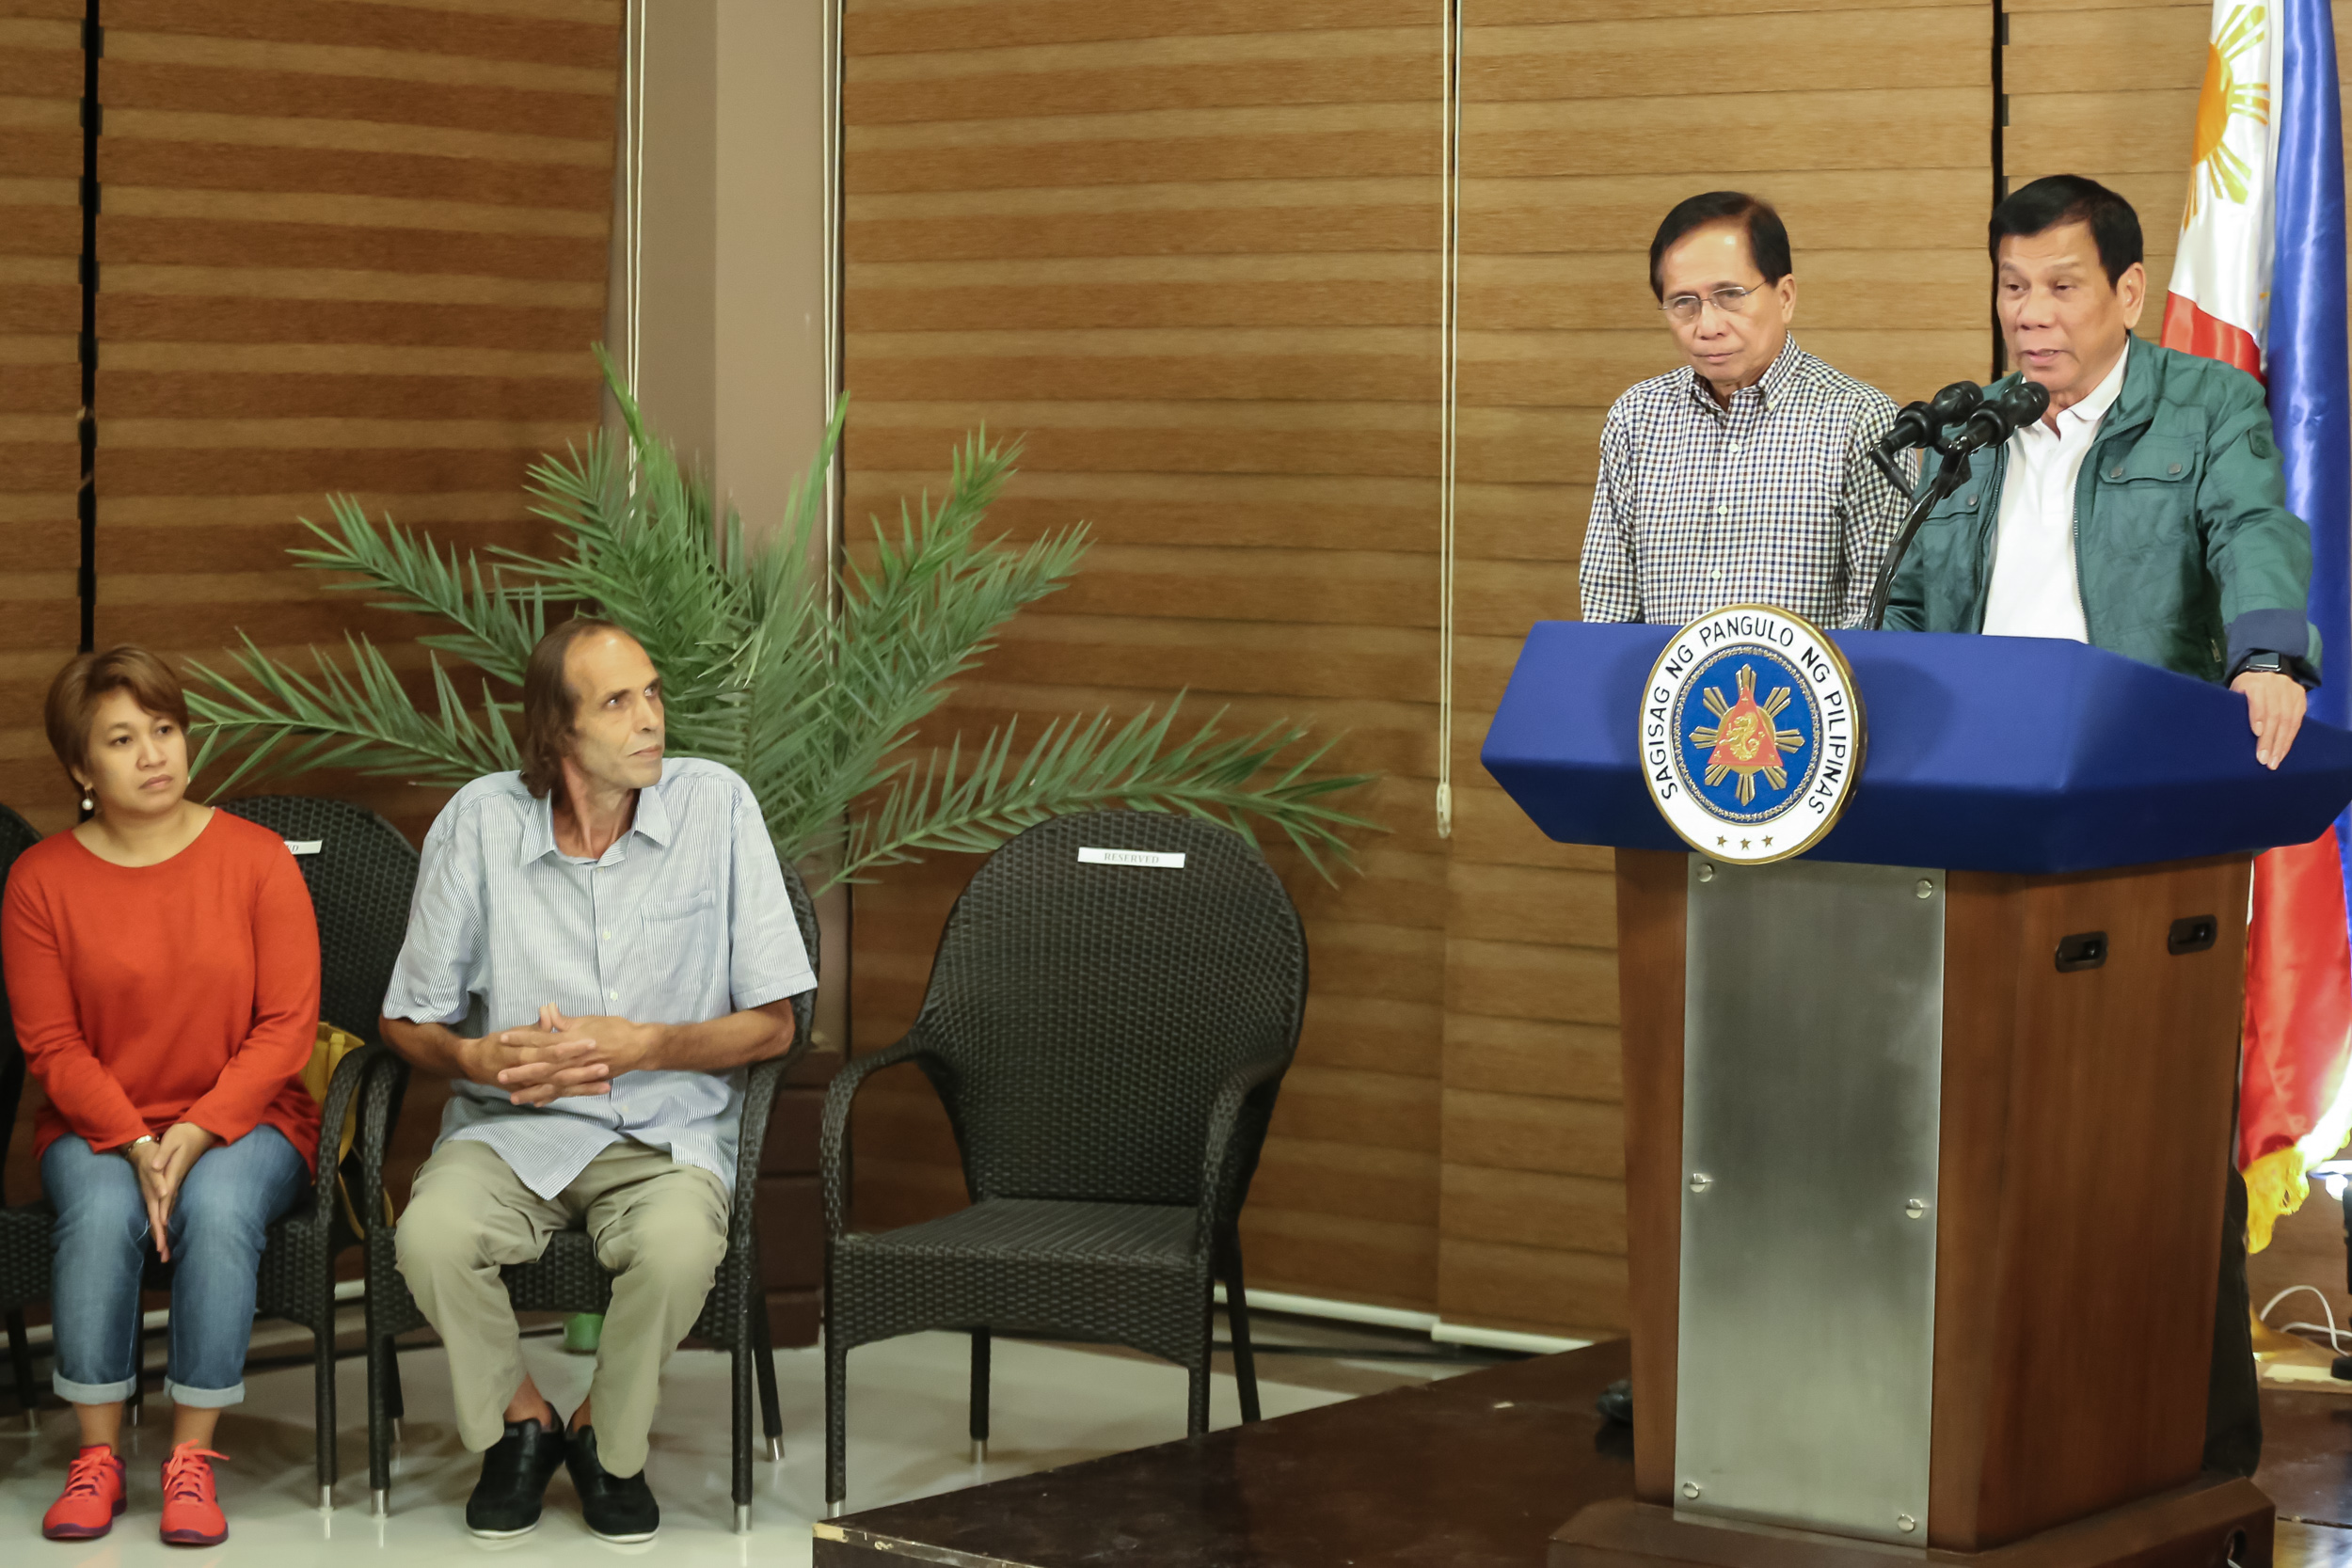 FREED HOSTAGE. President Rodrigo Duterte thanks the MNLF for the release of Kjartan Sekkingstad (seated, 2nd from left) and the 3 Indonesians. Photo by Manman Dejeto/Rappler    